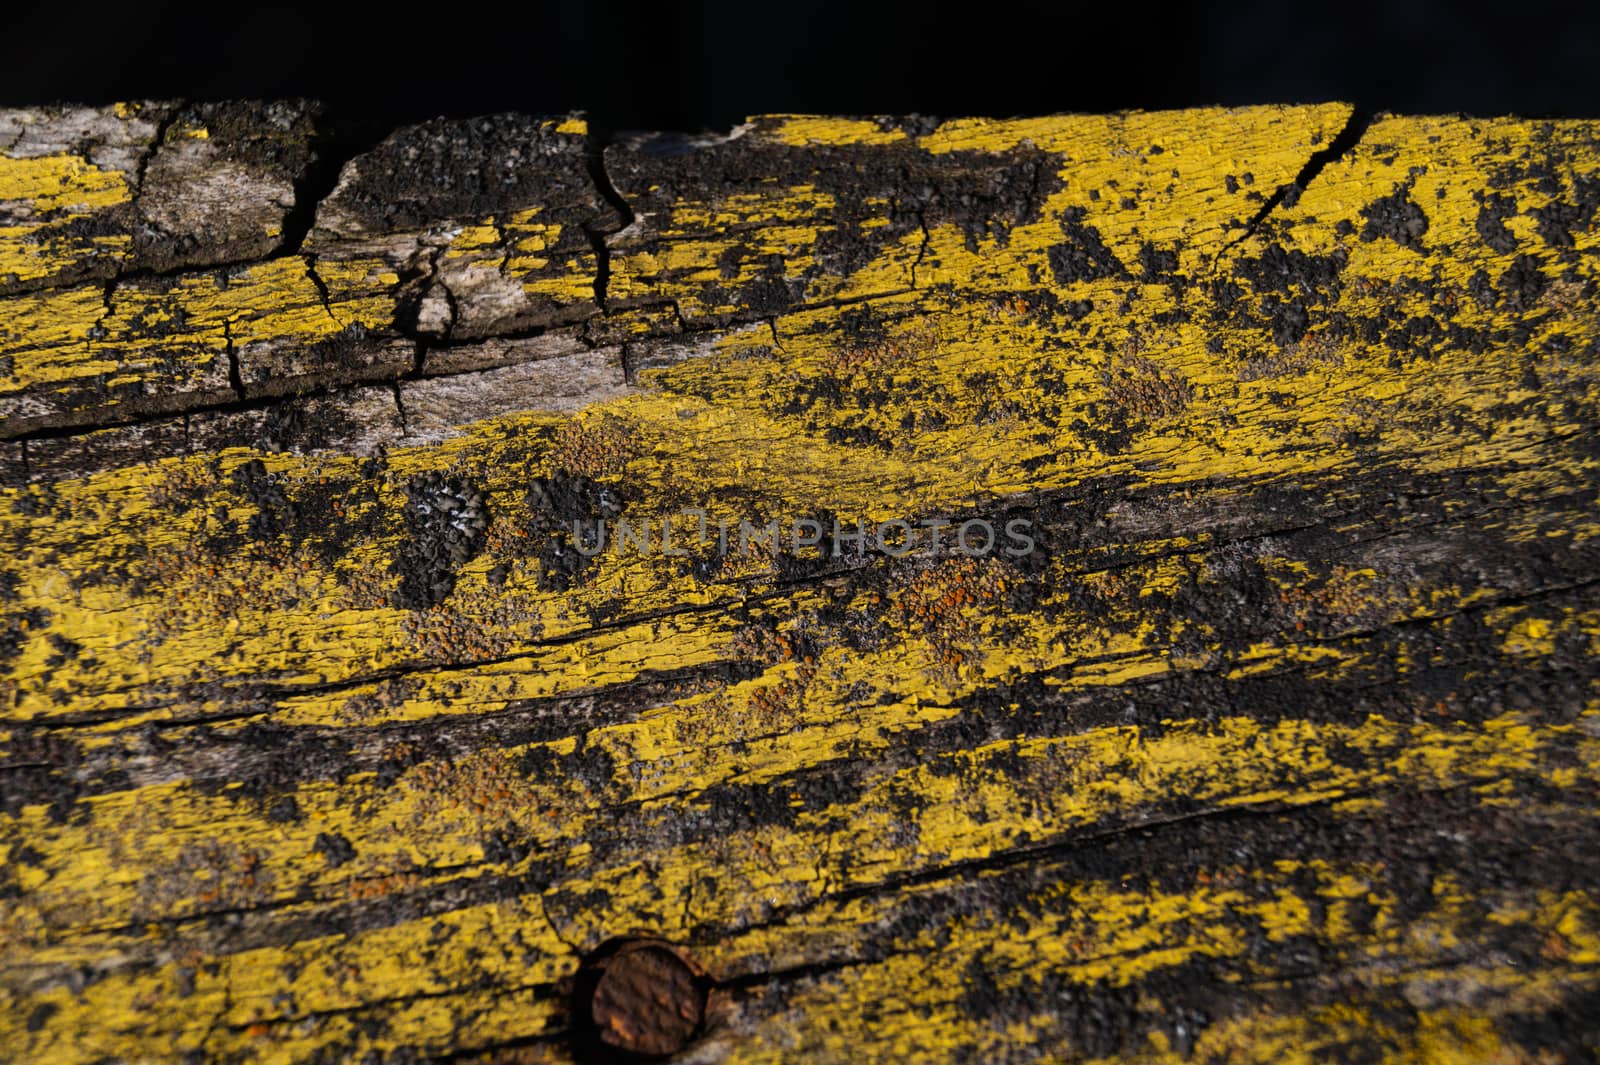 A part of old yellow wooden fence. The yellow paint on wood is old and cracked. Perfect painted wooden texture.